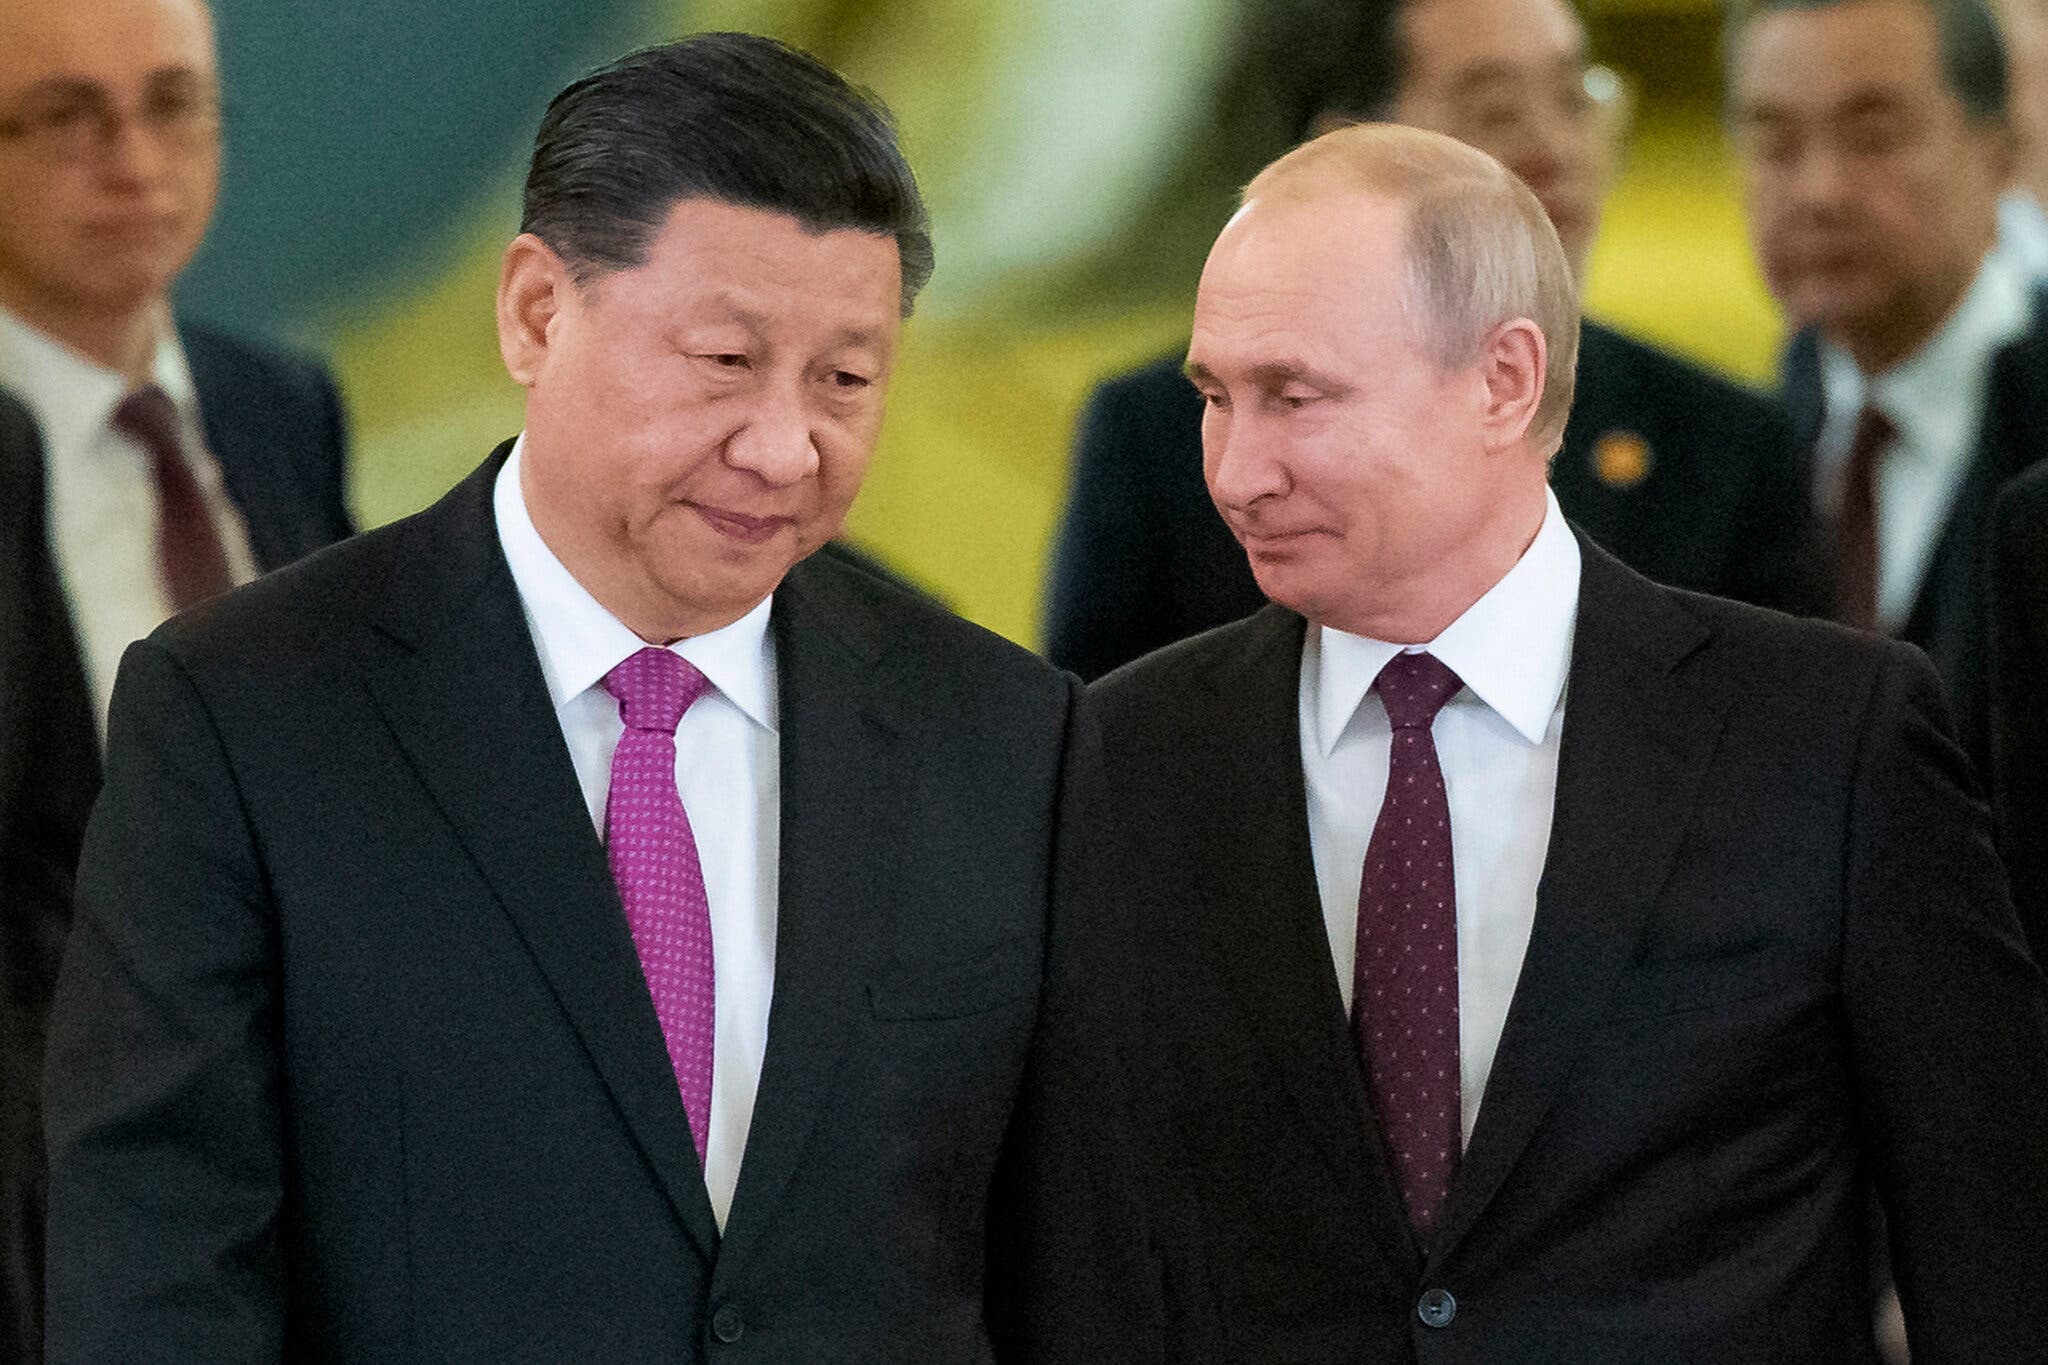 In Clash With U.S. Over Ukraine, Putin Has a Lifeline From China